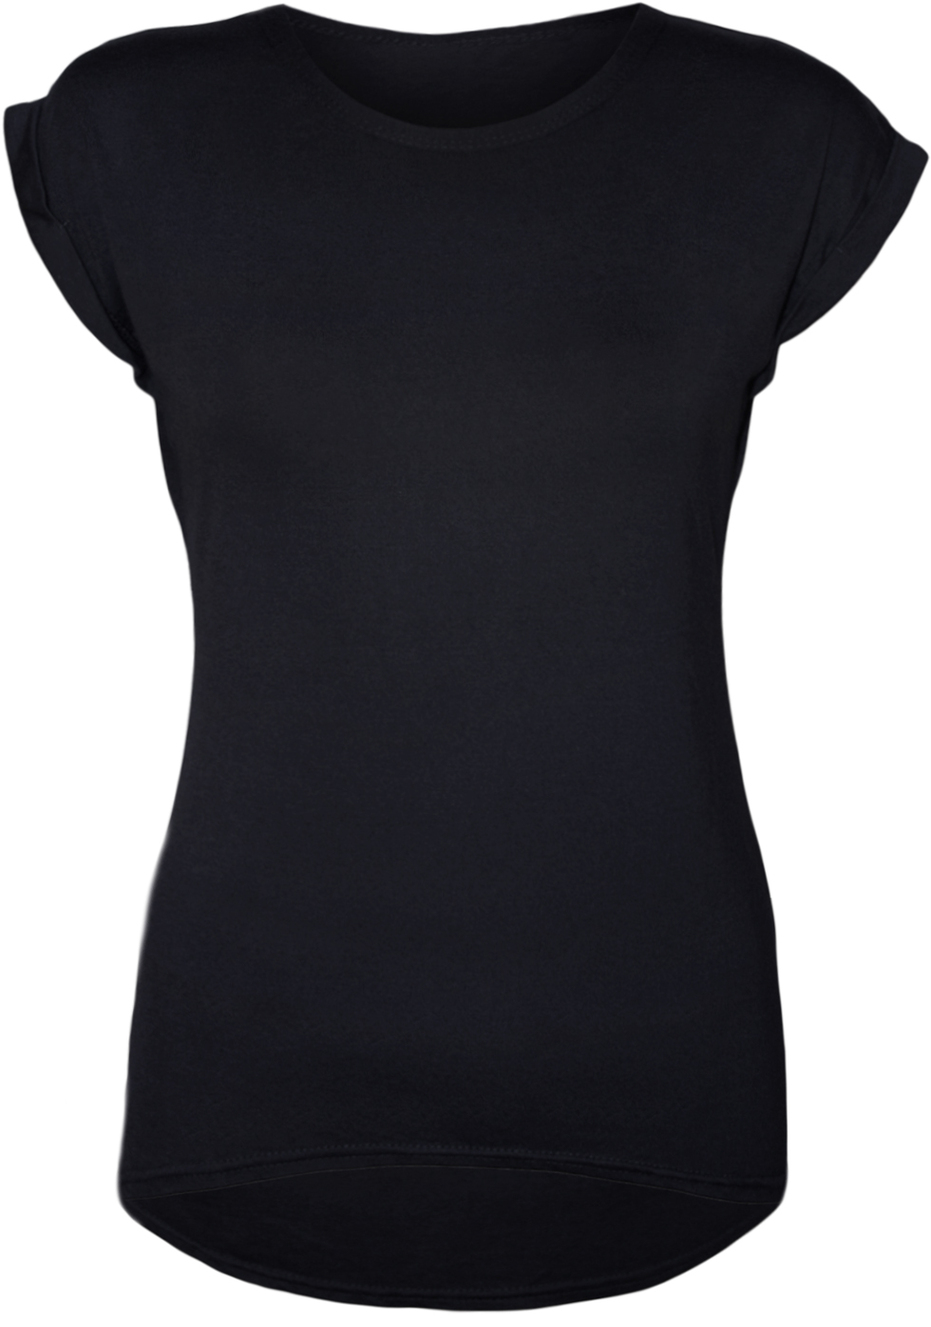 Black T Shirt Clipart - Free to use Clip Art Resource